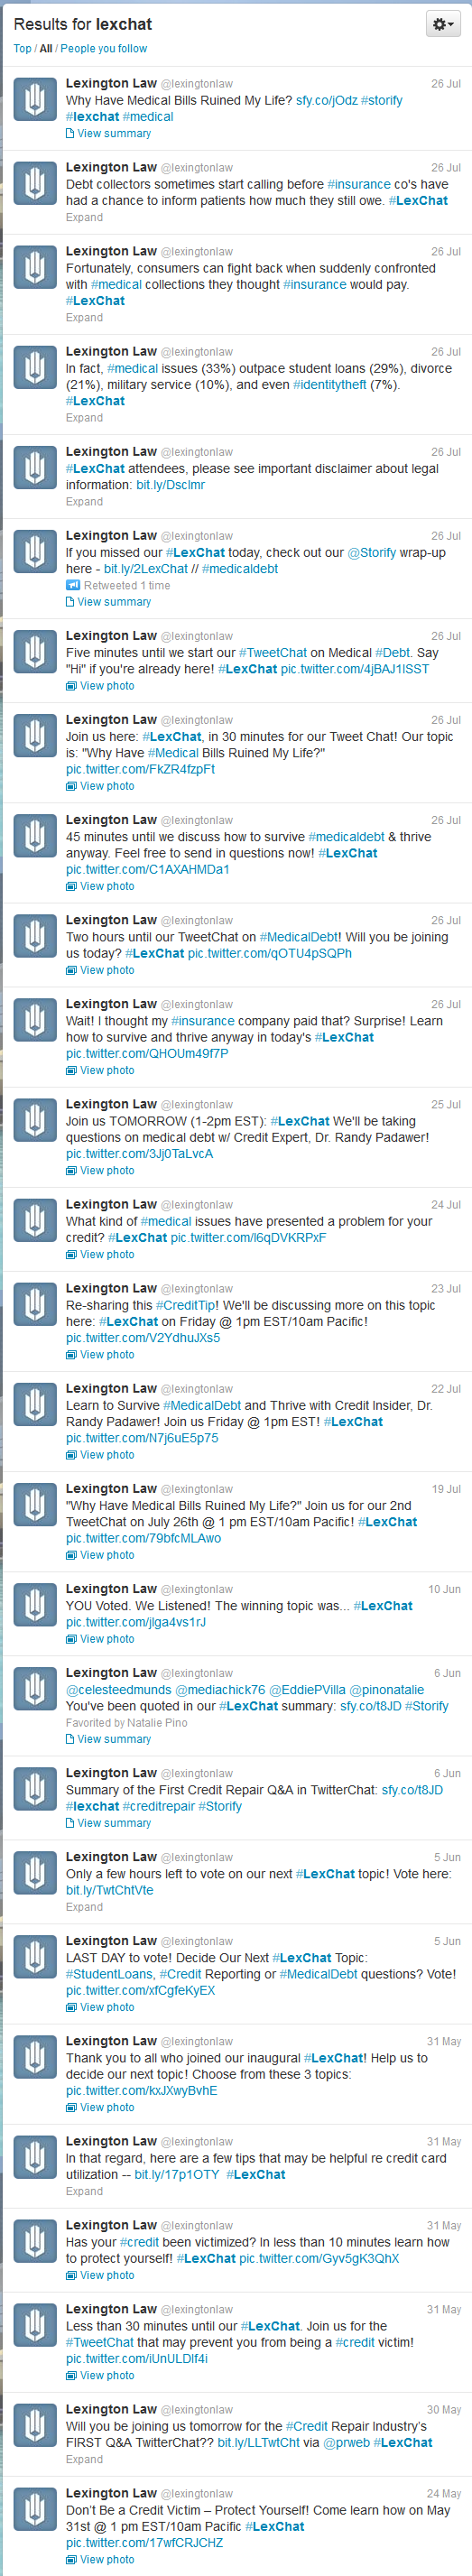 #LexChat Tweets helped educate and warn people about the dangers of Medical Debt.